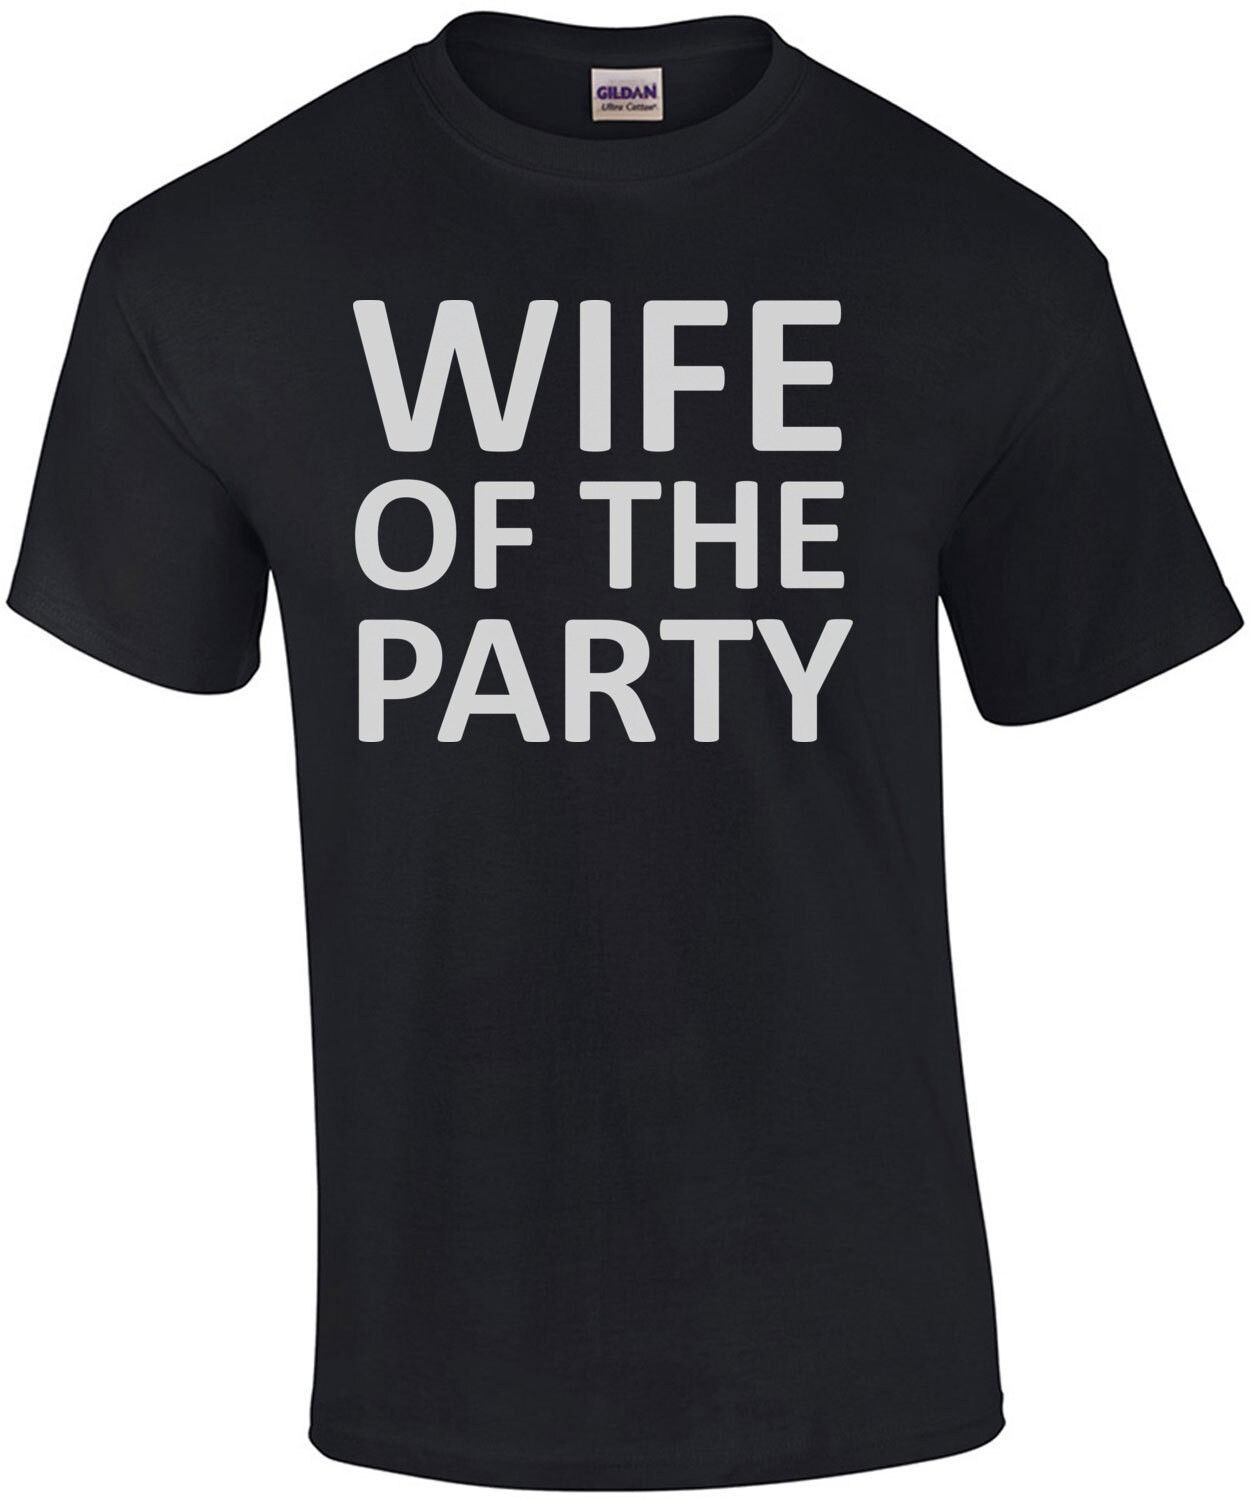 Wife of the party - funny ladies t-shirt